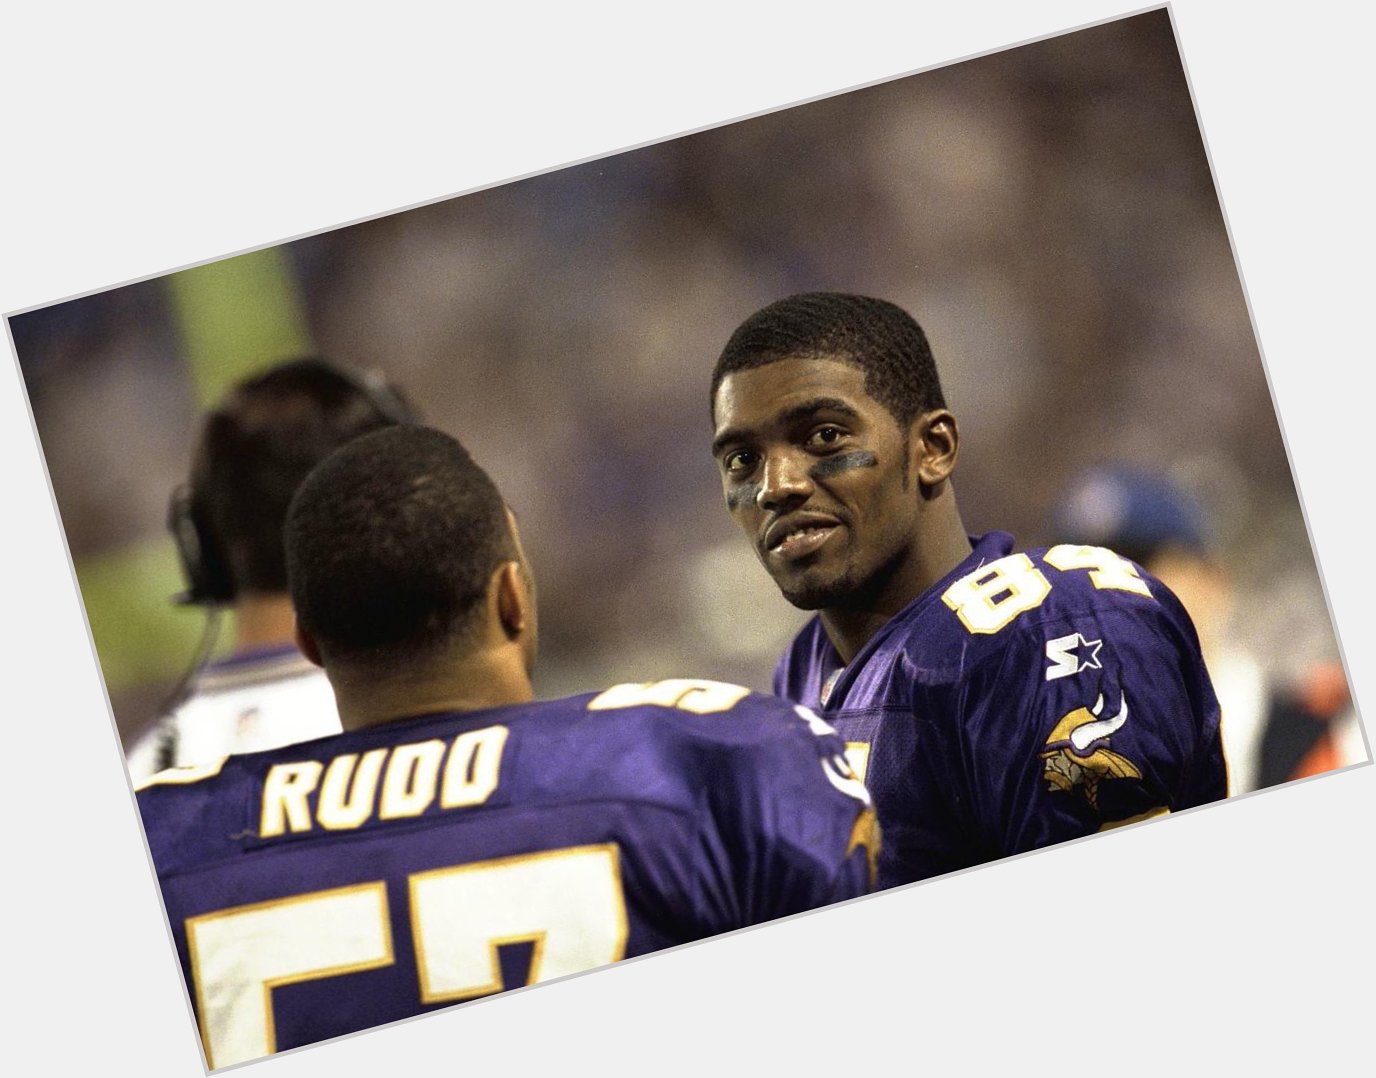 Happy Birthday to the legendary receiver that is Randy Moss! 